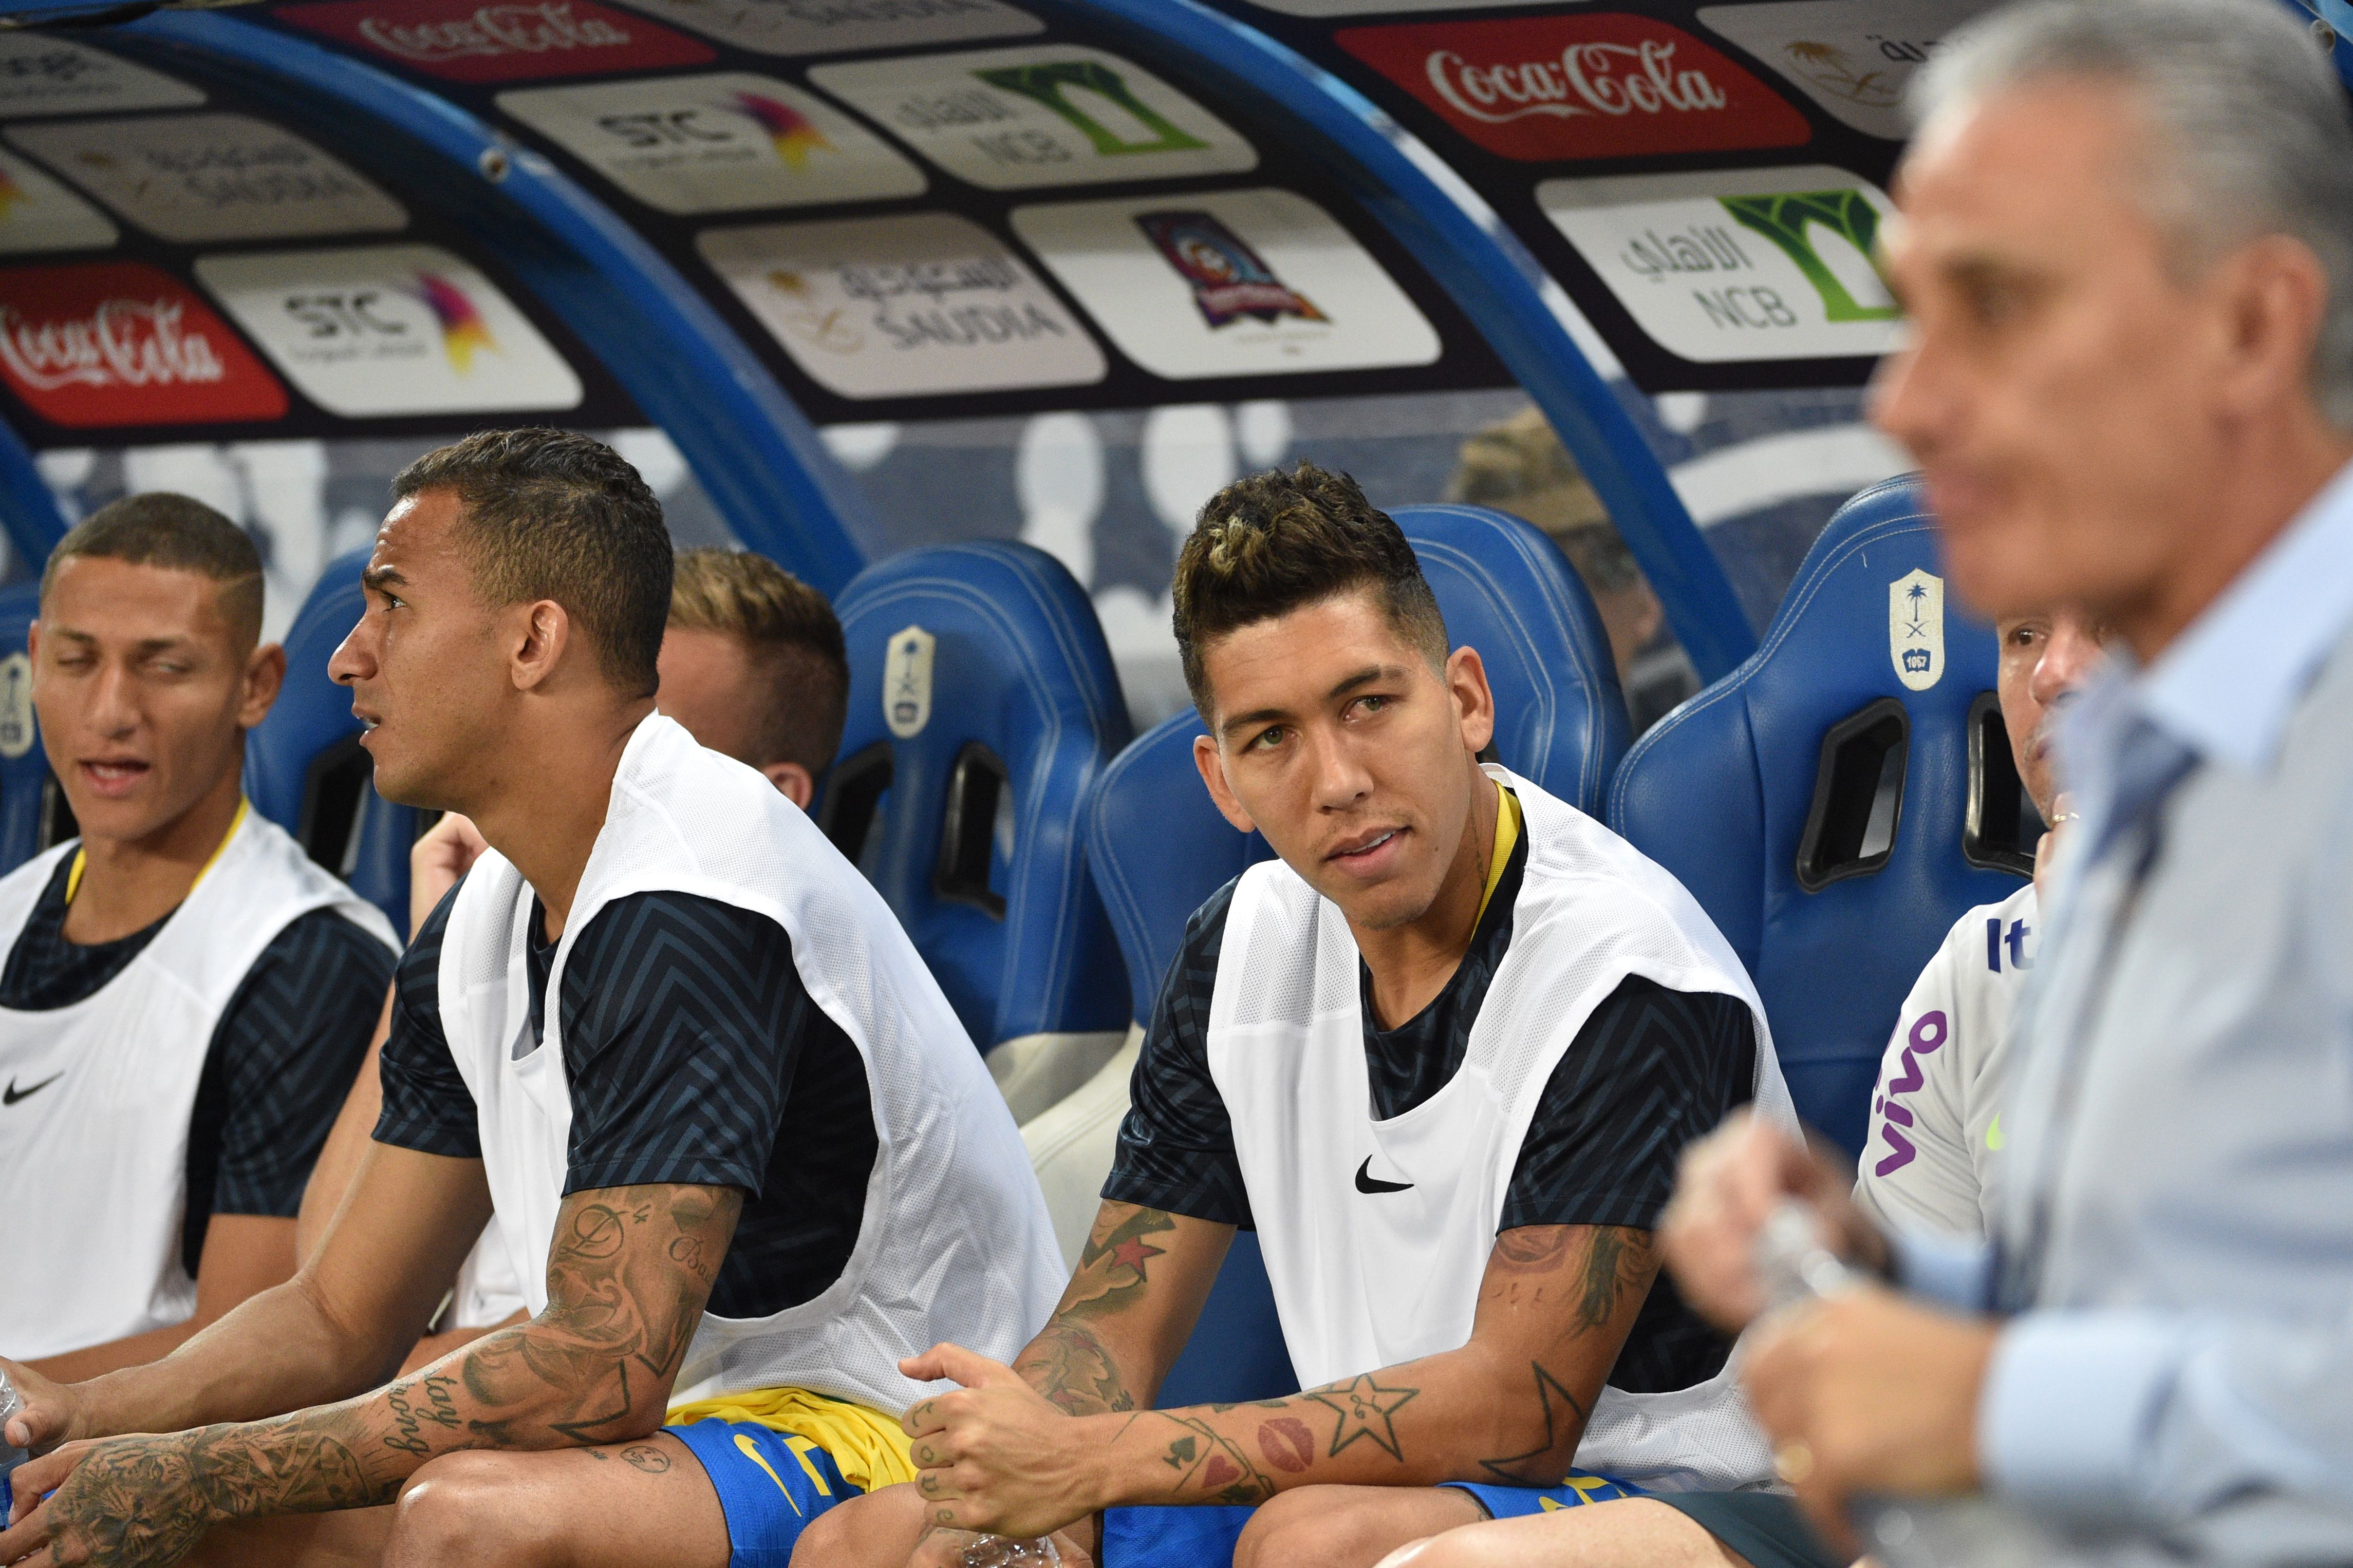 Brazil's forward Roberto Firmino (2nd-R) looks at his coach Adenor Leonardo Bacchi (Tite) during the friendly football match between Saudi Arabia and Brazil at the King Saud University Stadium in Riyadh on October 12, 2018. (Photo by FAYEZ NURELDINE / AFP)        (Photo credit should read FAYEZ NURELDINE/AFP/Getty Images)